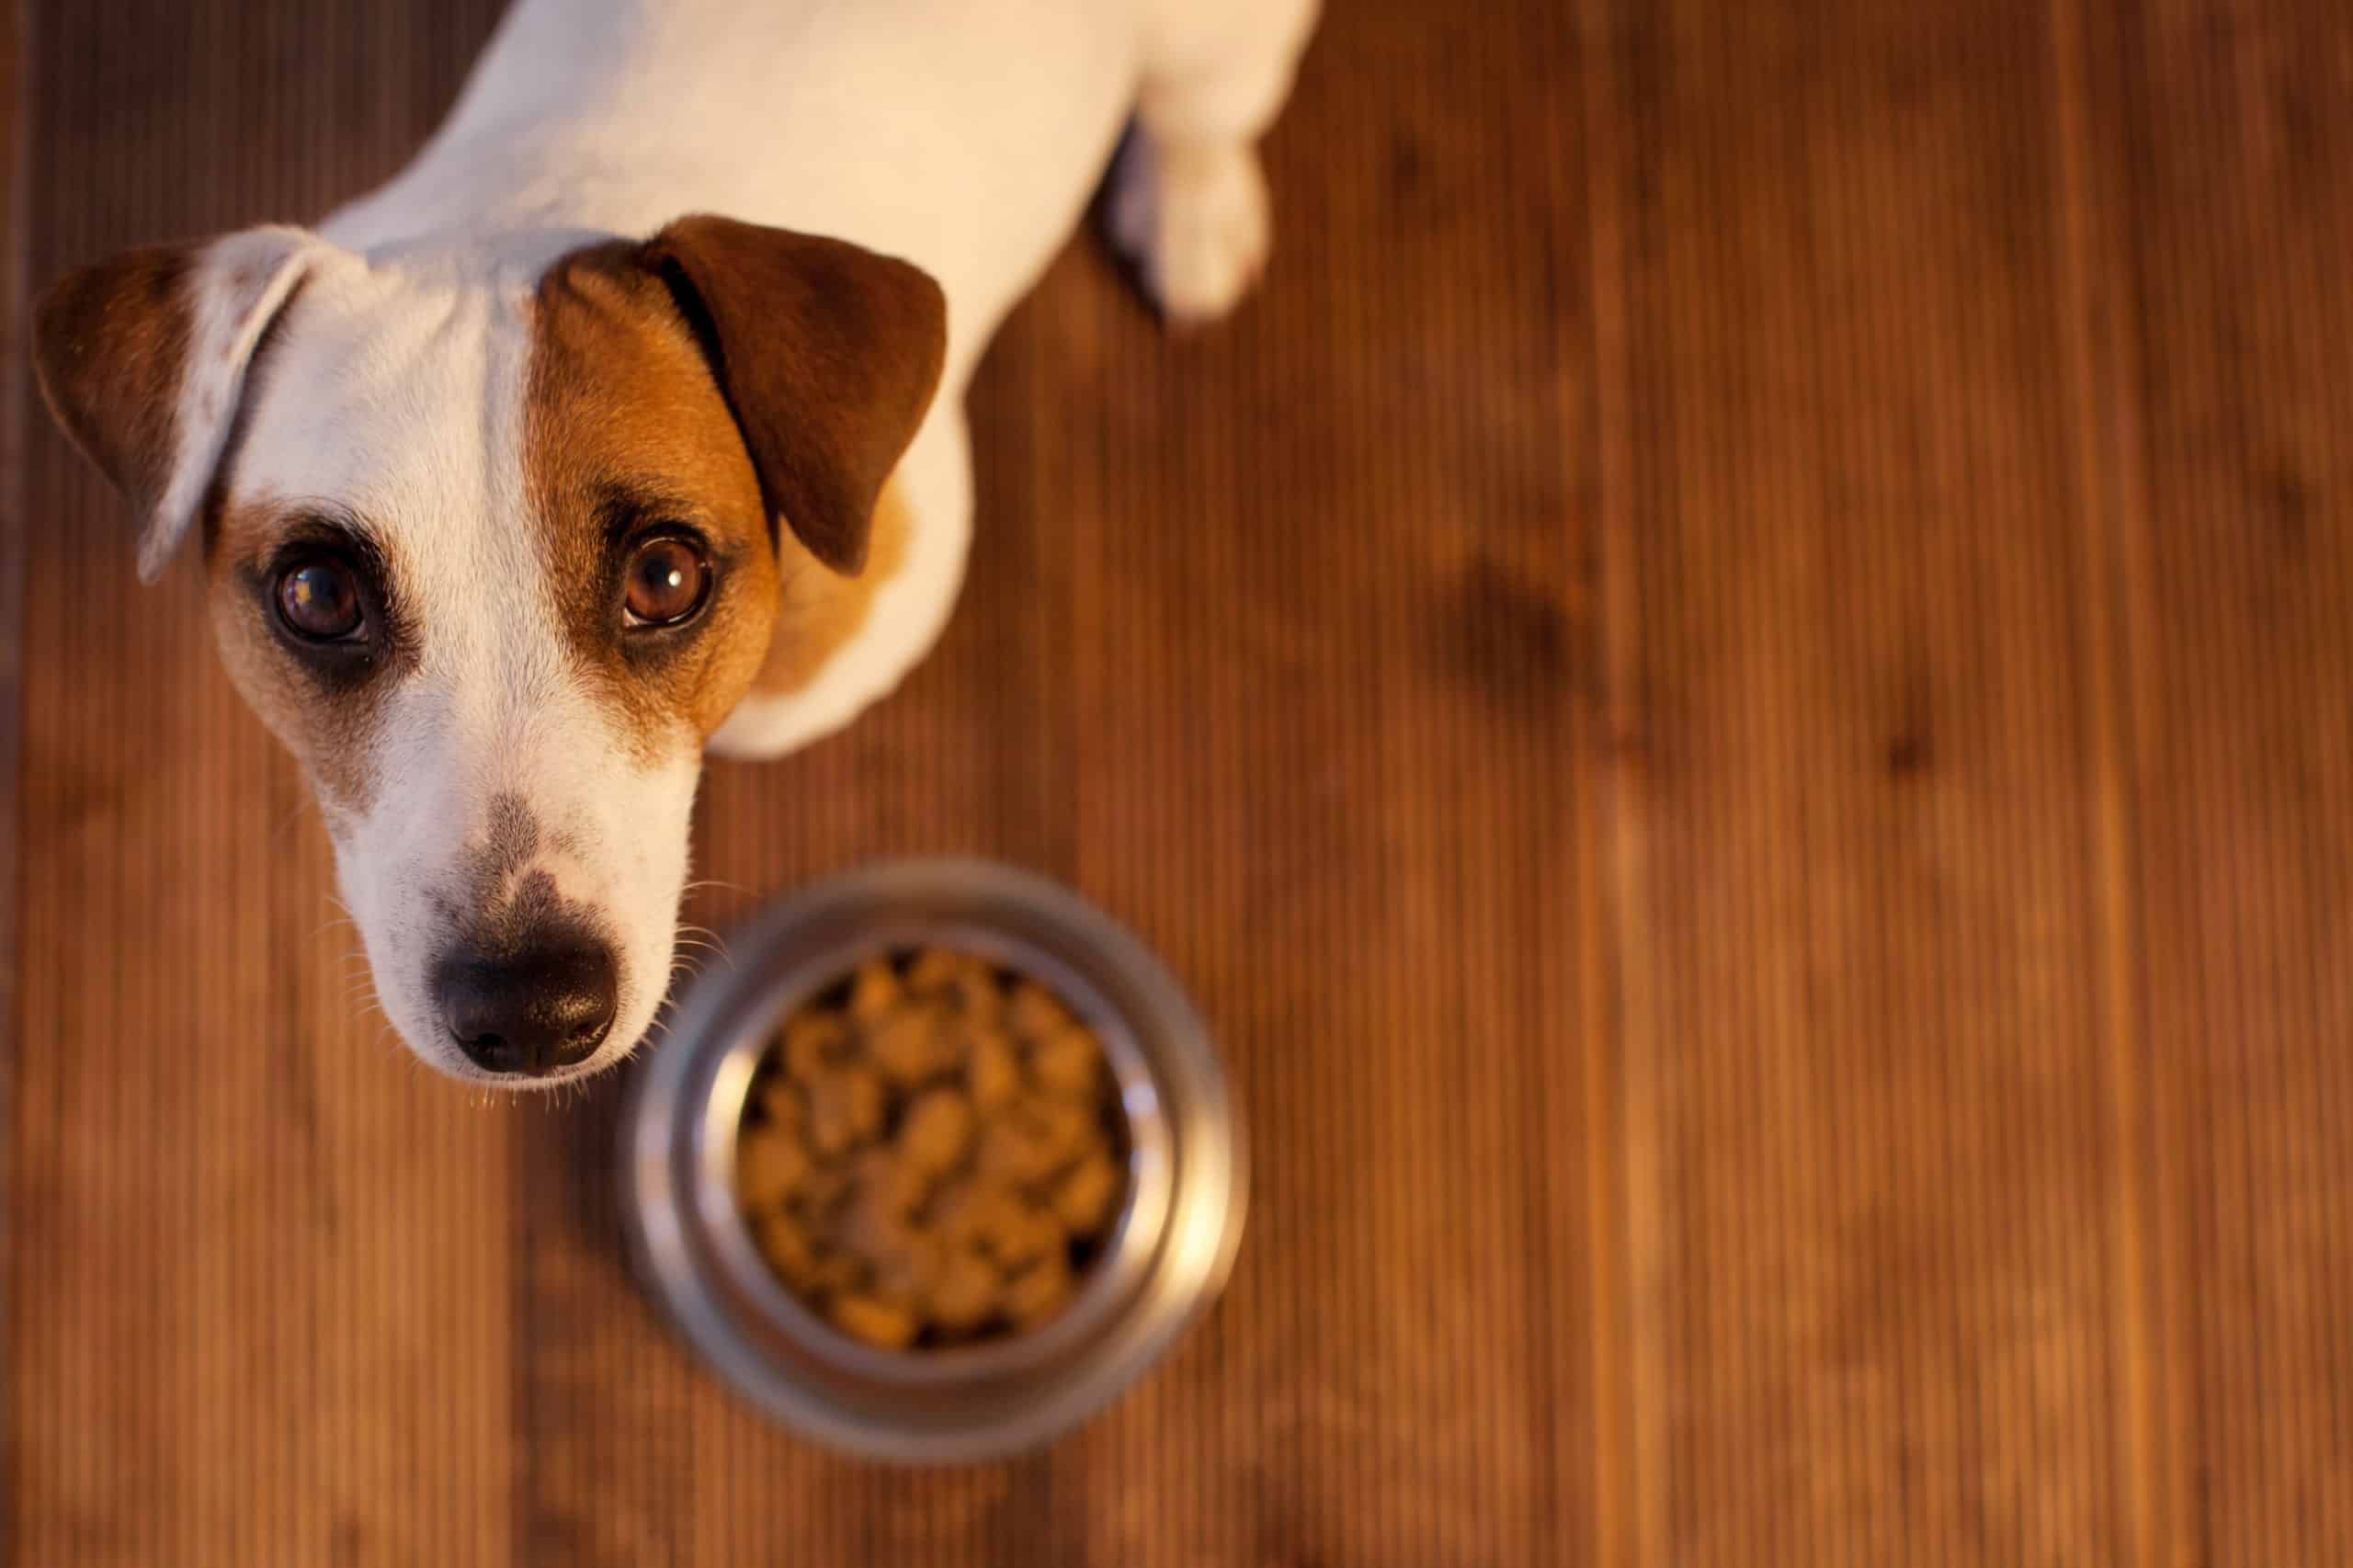 How does dog food taste to dogs?